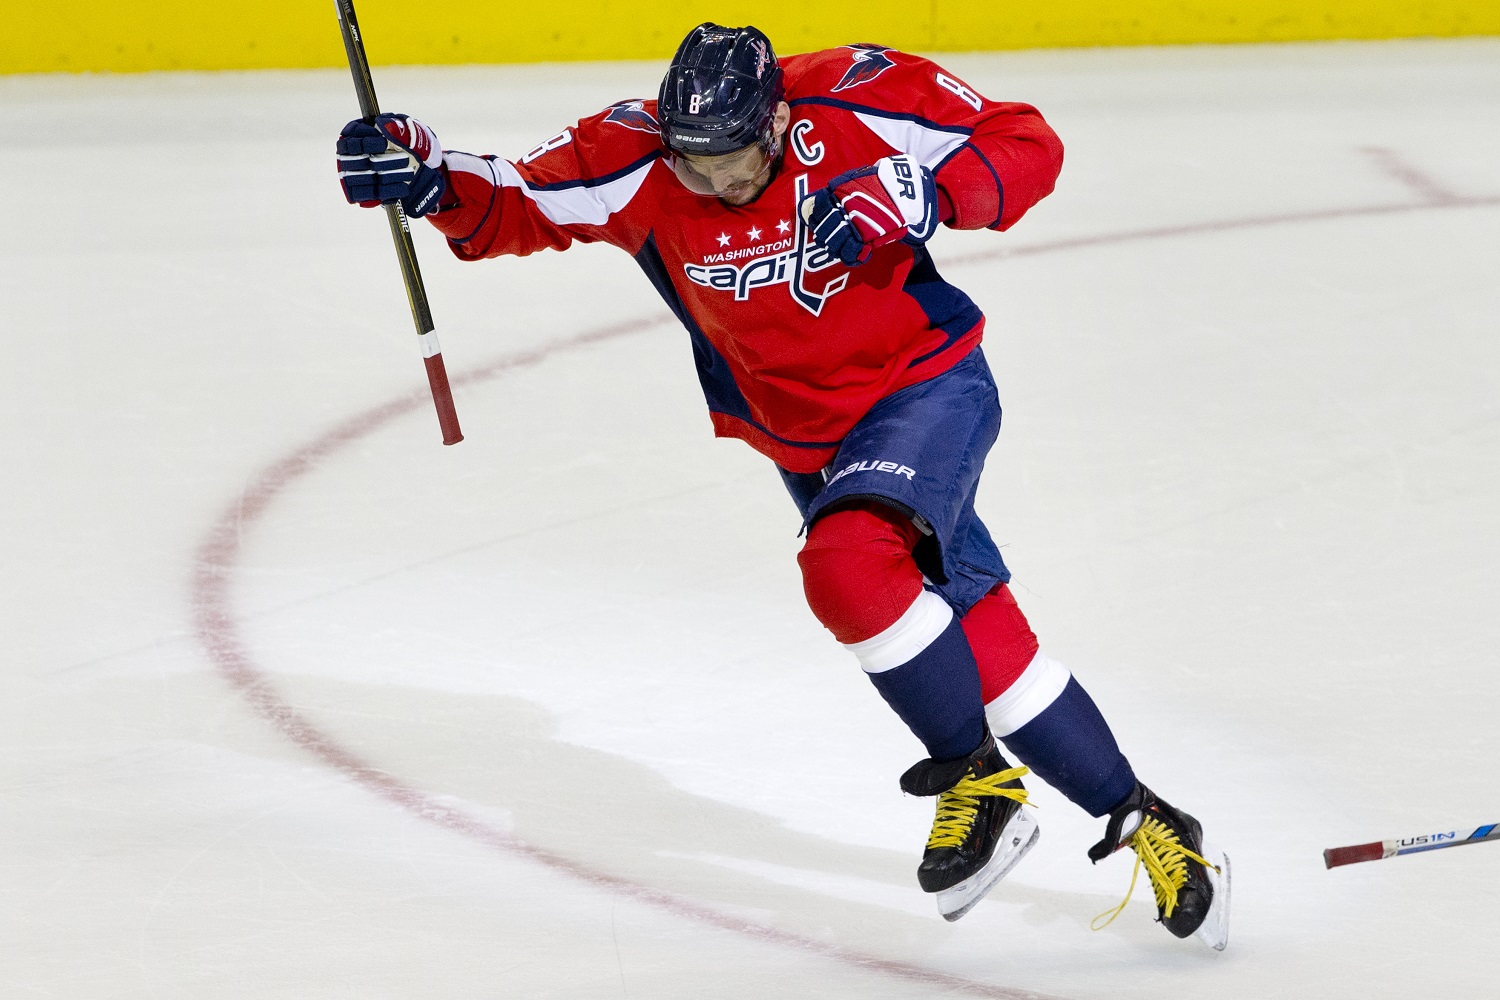 The Washington Capitals left wing Alex Ovechkin, (8), of Russia, leaps in the air in celebration after scoring his 500th career NHL goal during the second period of a hockey game against the Ottawa Senators in Washington, D.C., Sunday, Jan. 10, 2016. (AP Photo/Jacquelyn Martin)